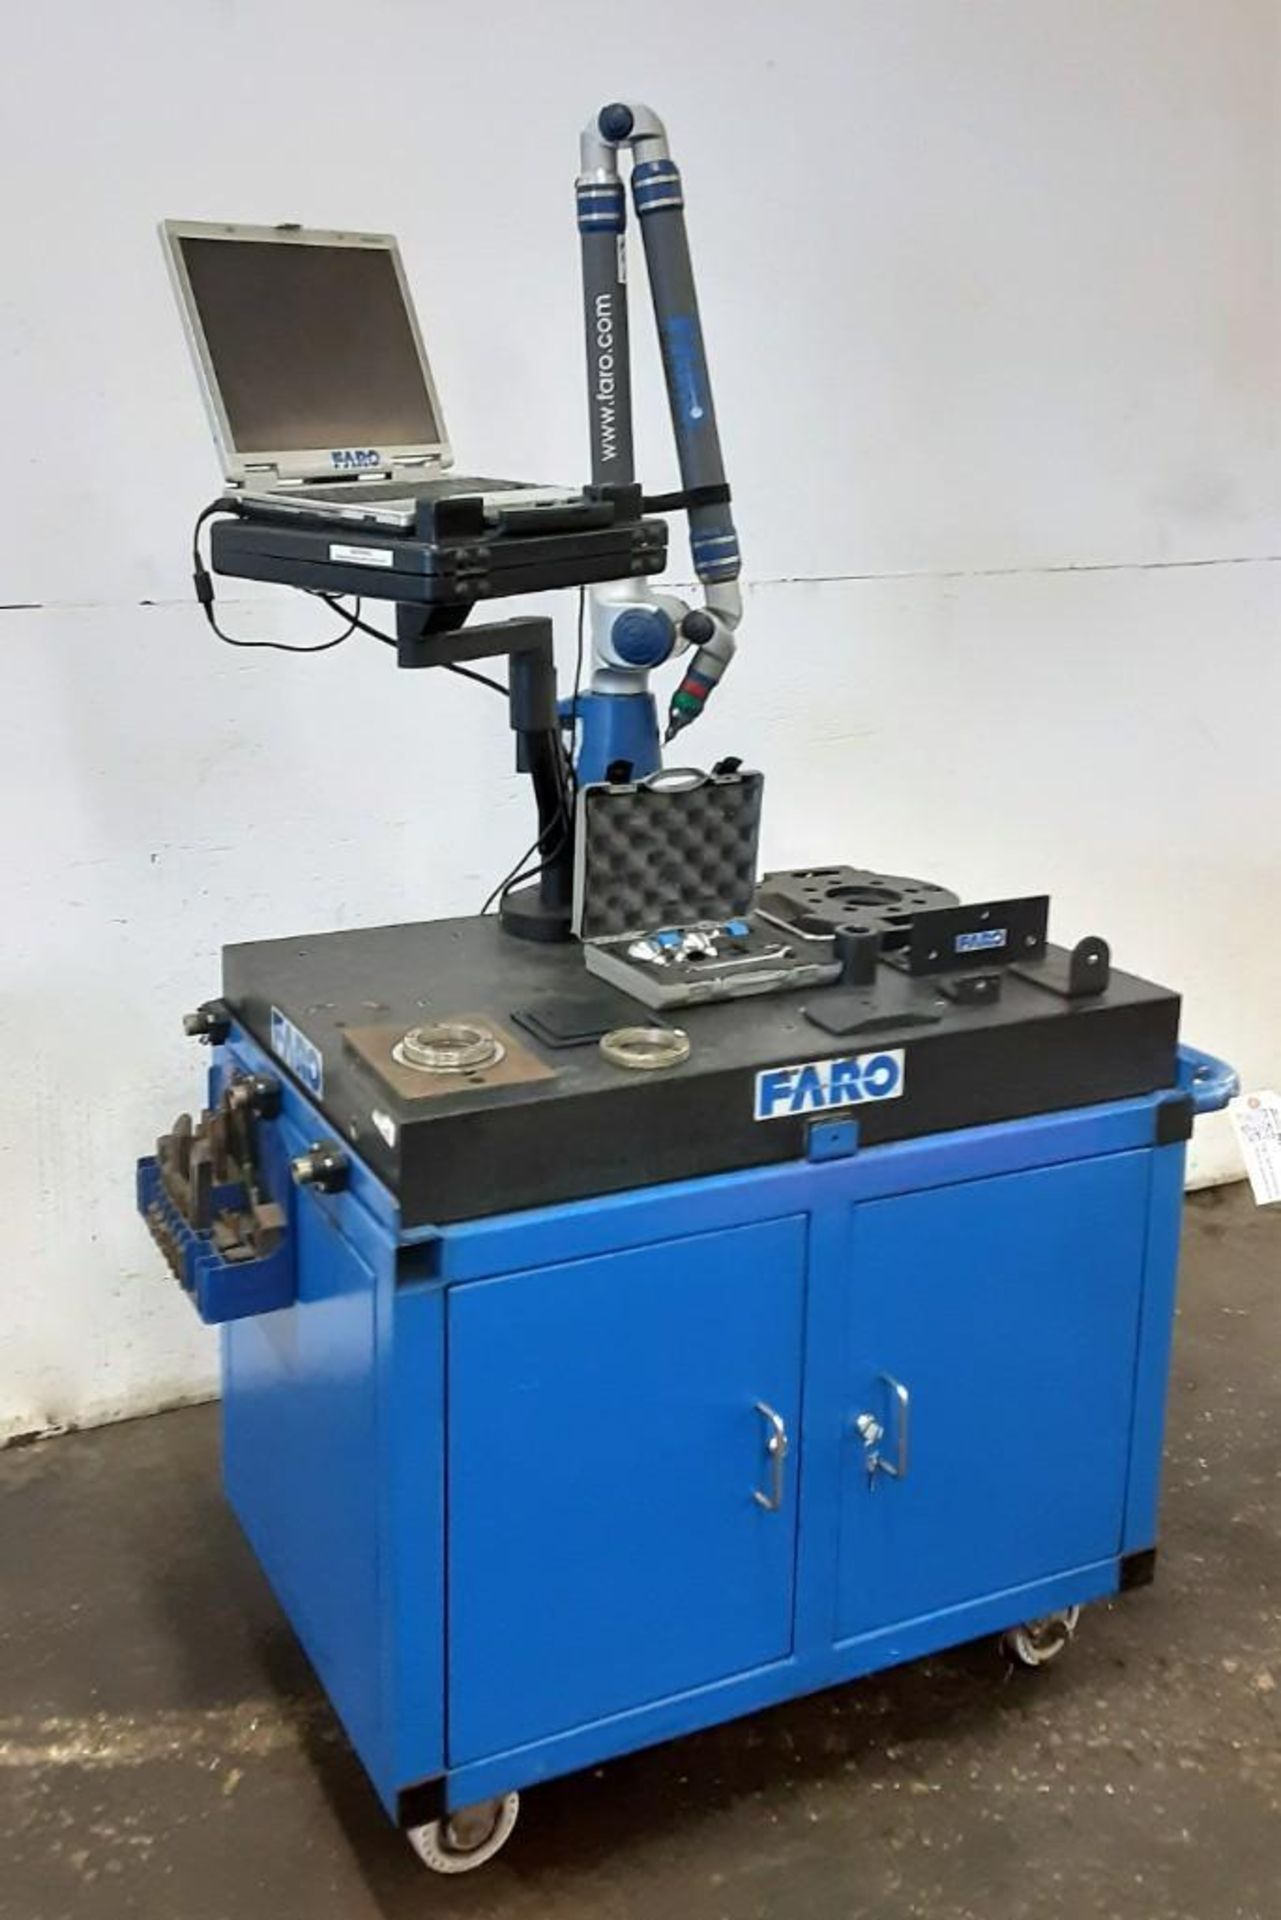 FARO portable CMM titanium arm with granite surface plate, computer and cart.